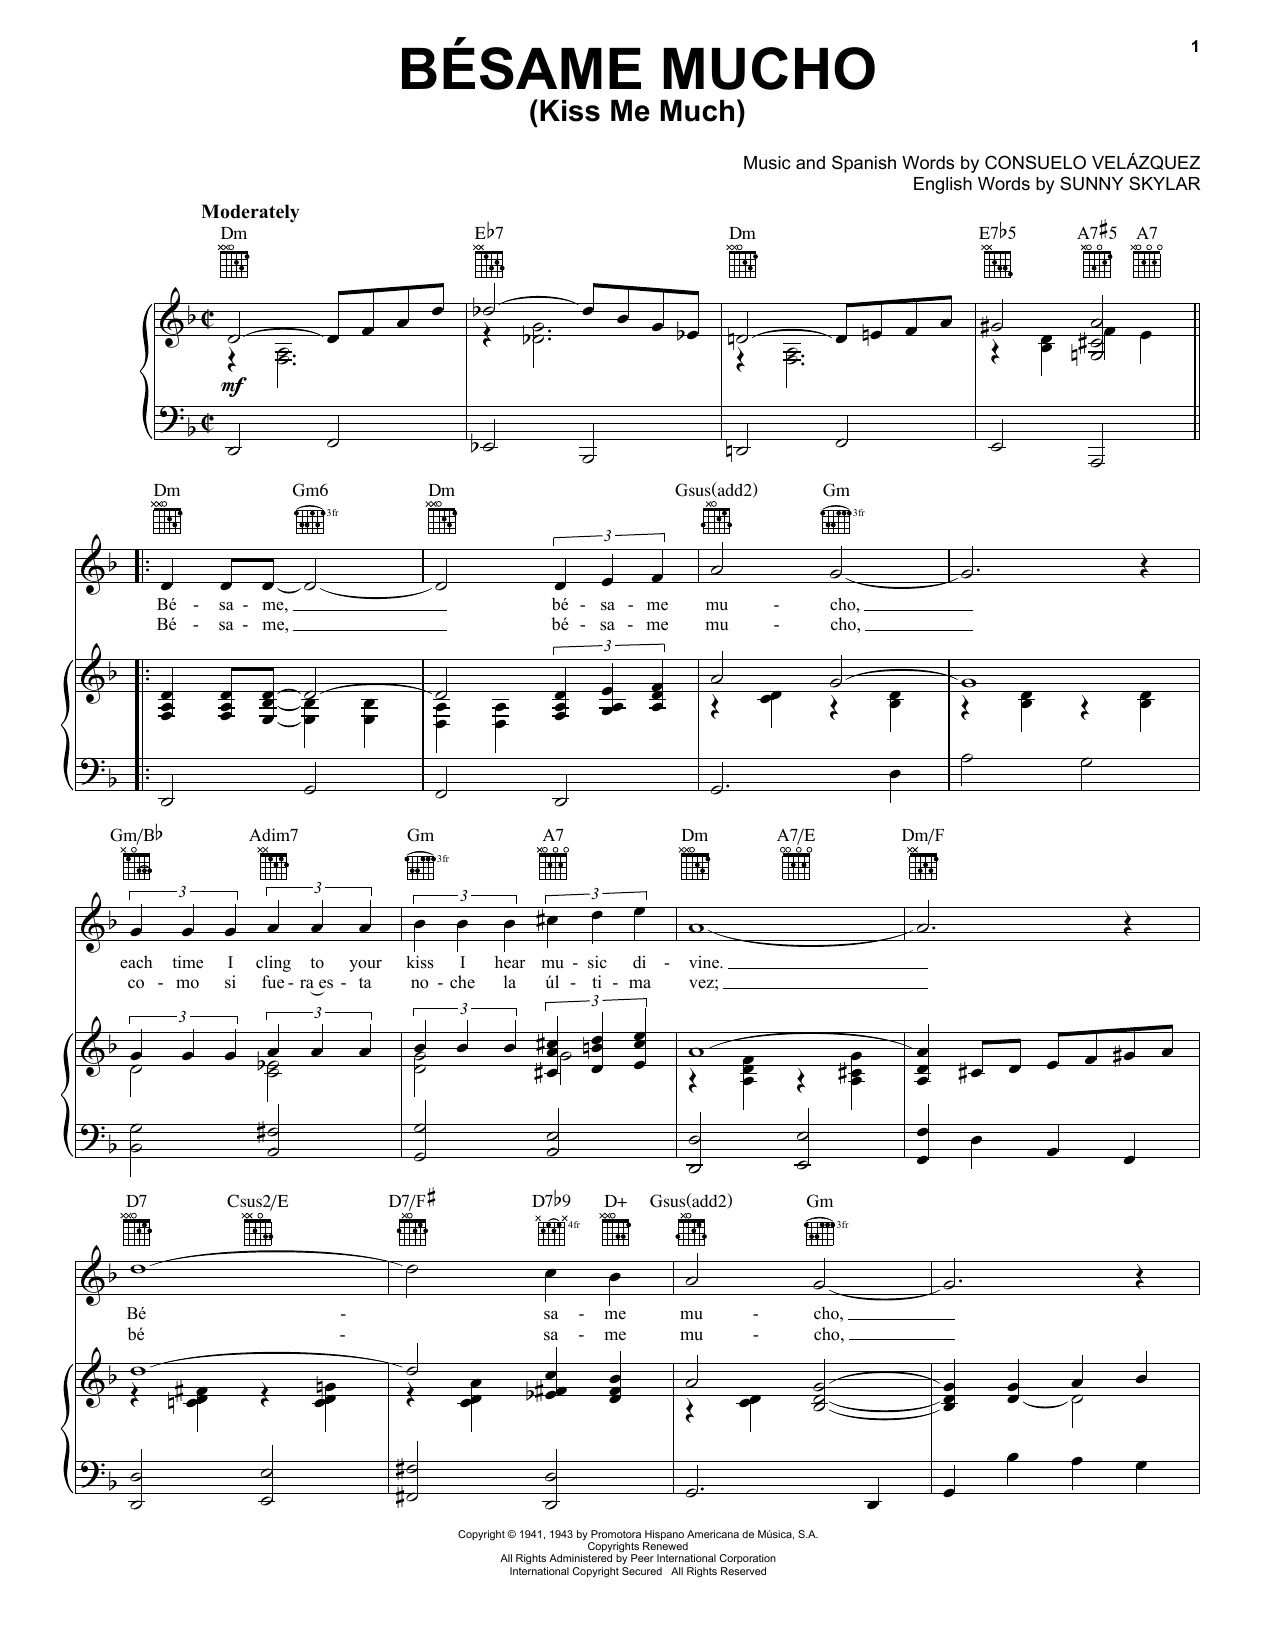 Diana Krall Besame Mucho (Kiss Me Much) sheet music notes printable PDF score